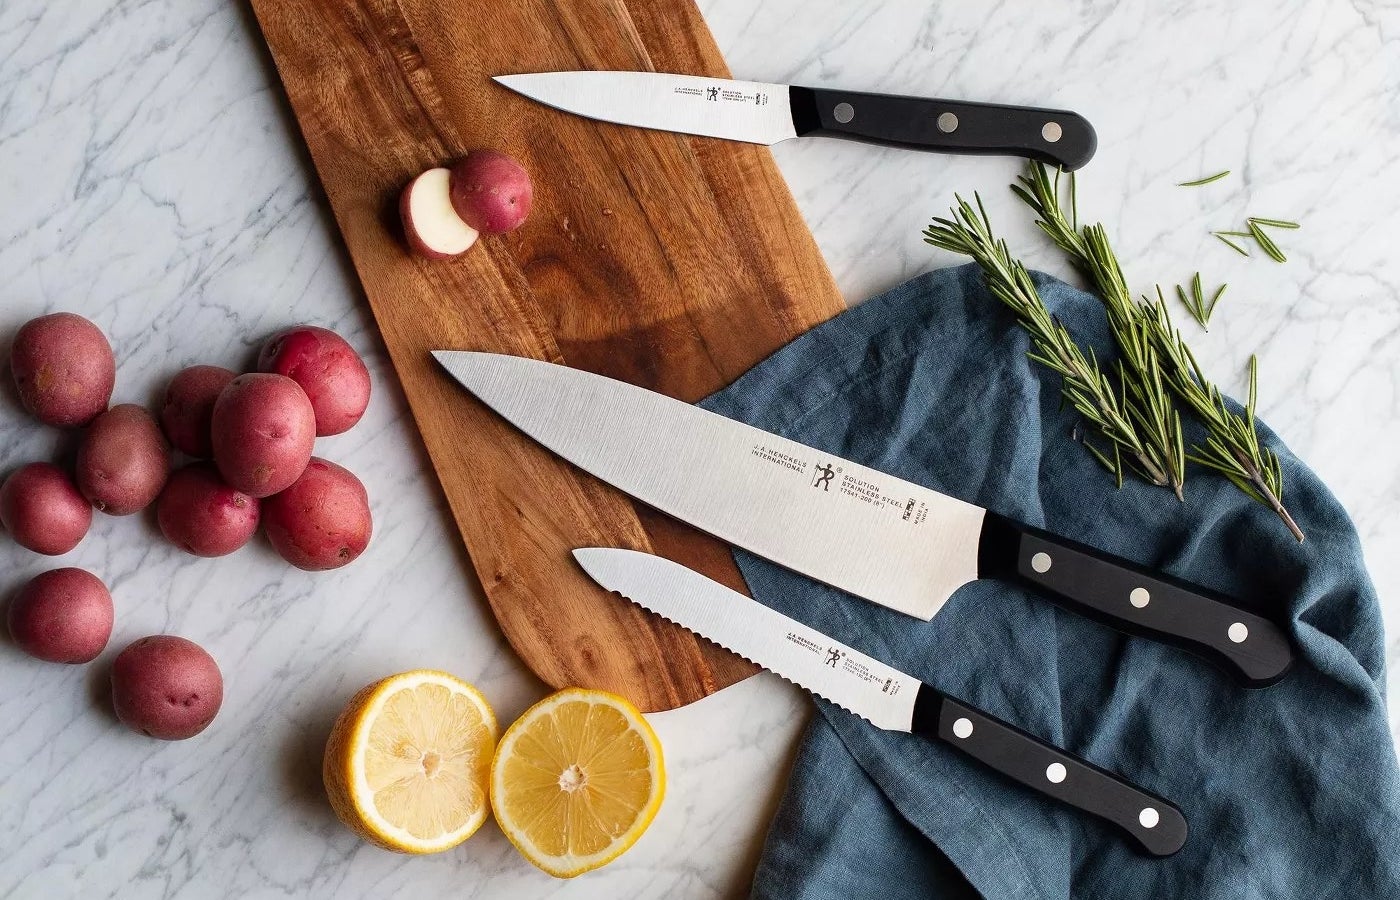 A chef knife, a bread knife, and a paring knife